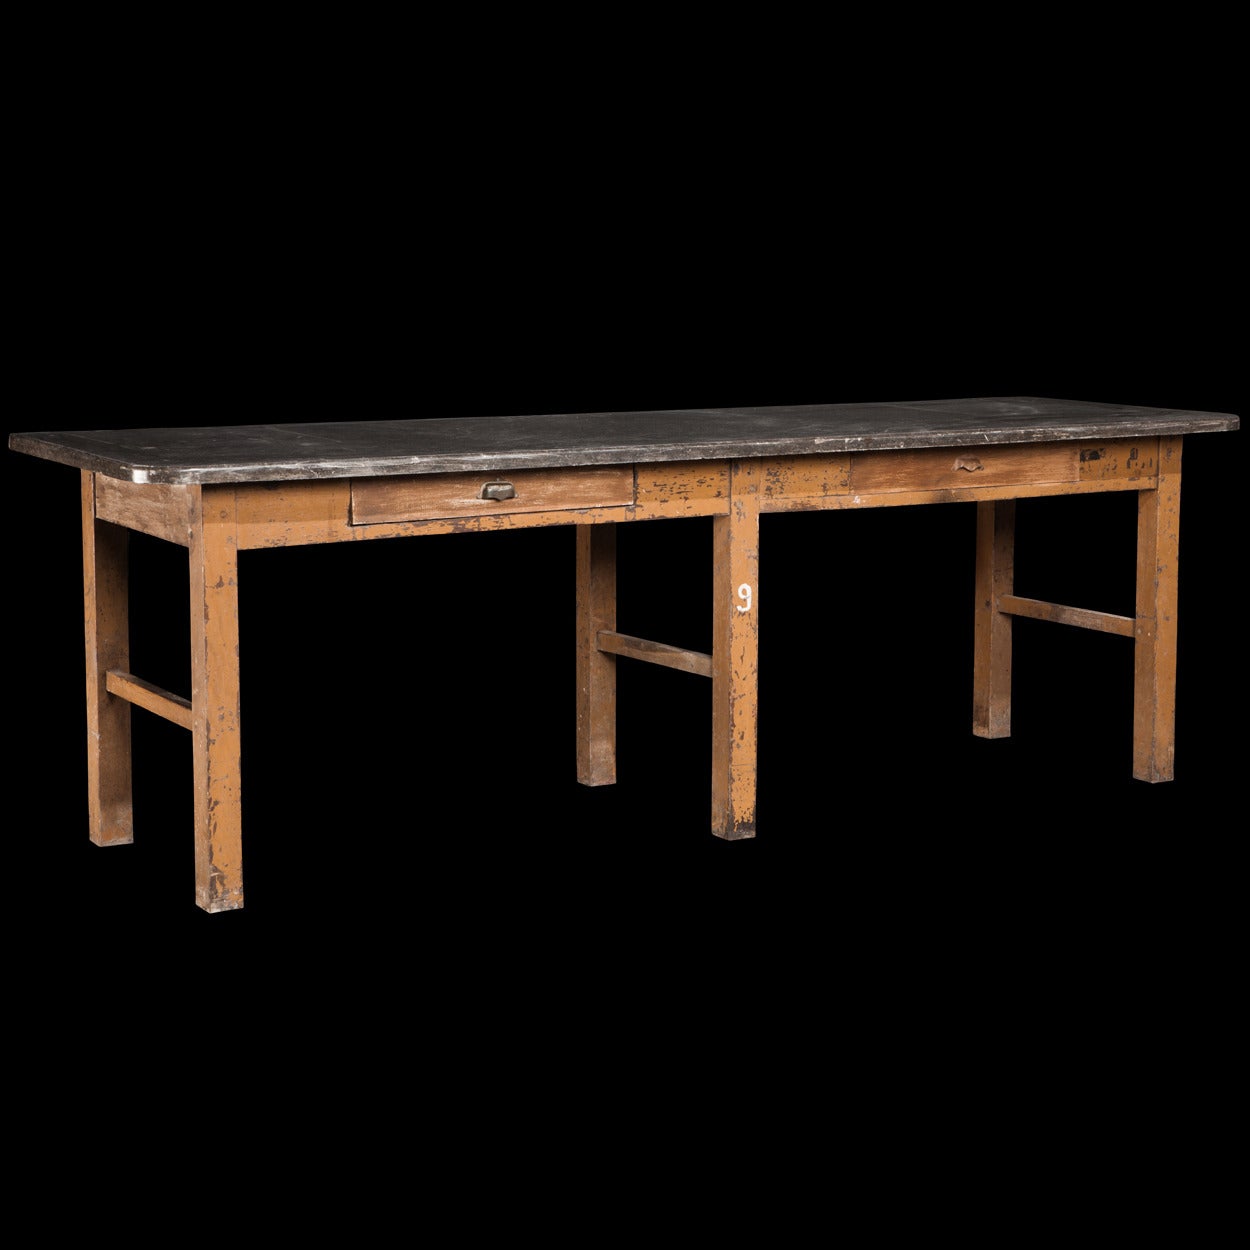 Lab table with solid marble top and oak body, marked no. 9. 

Made in England circa 1930.